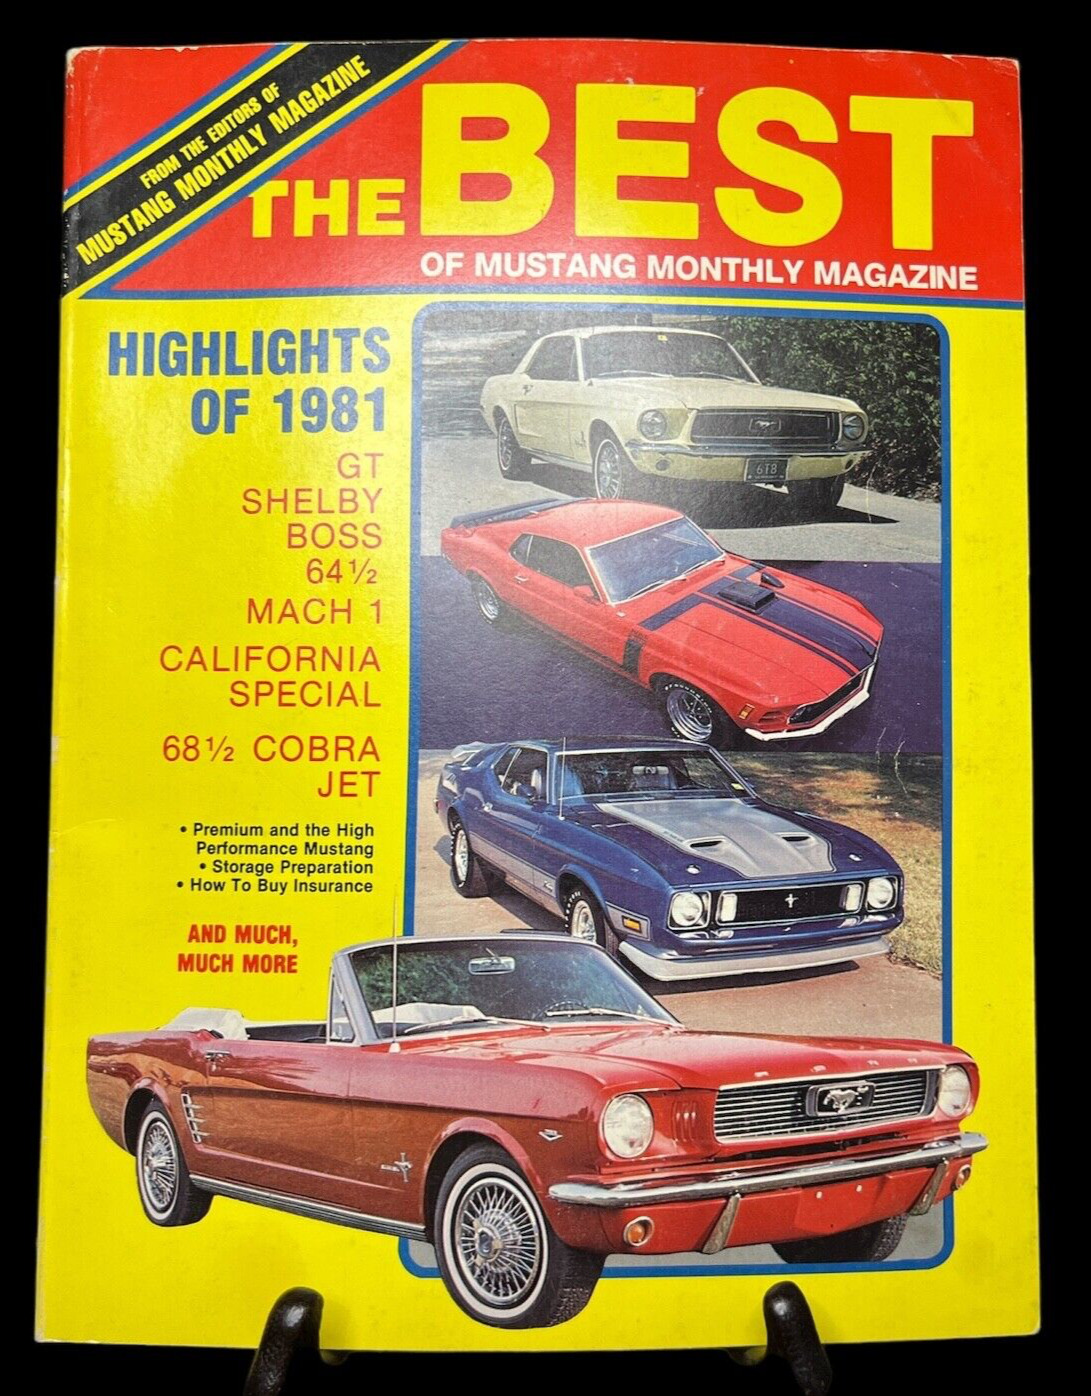 MUSTANG The Best of  Monthly Magazine 1981 Vintage